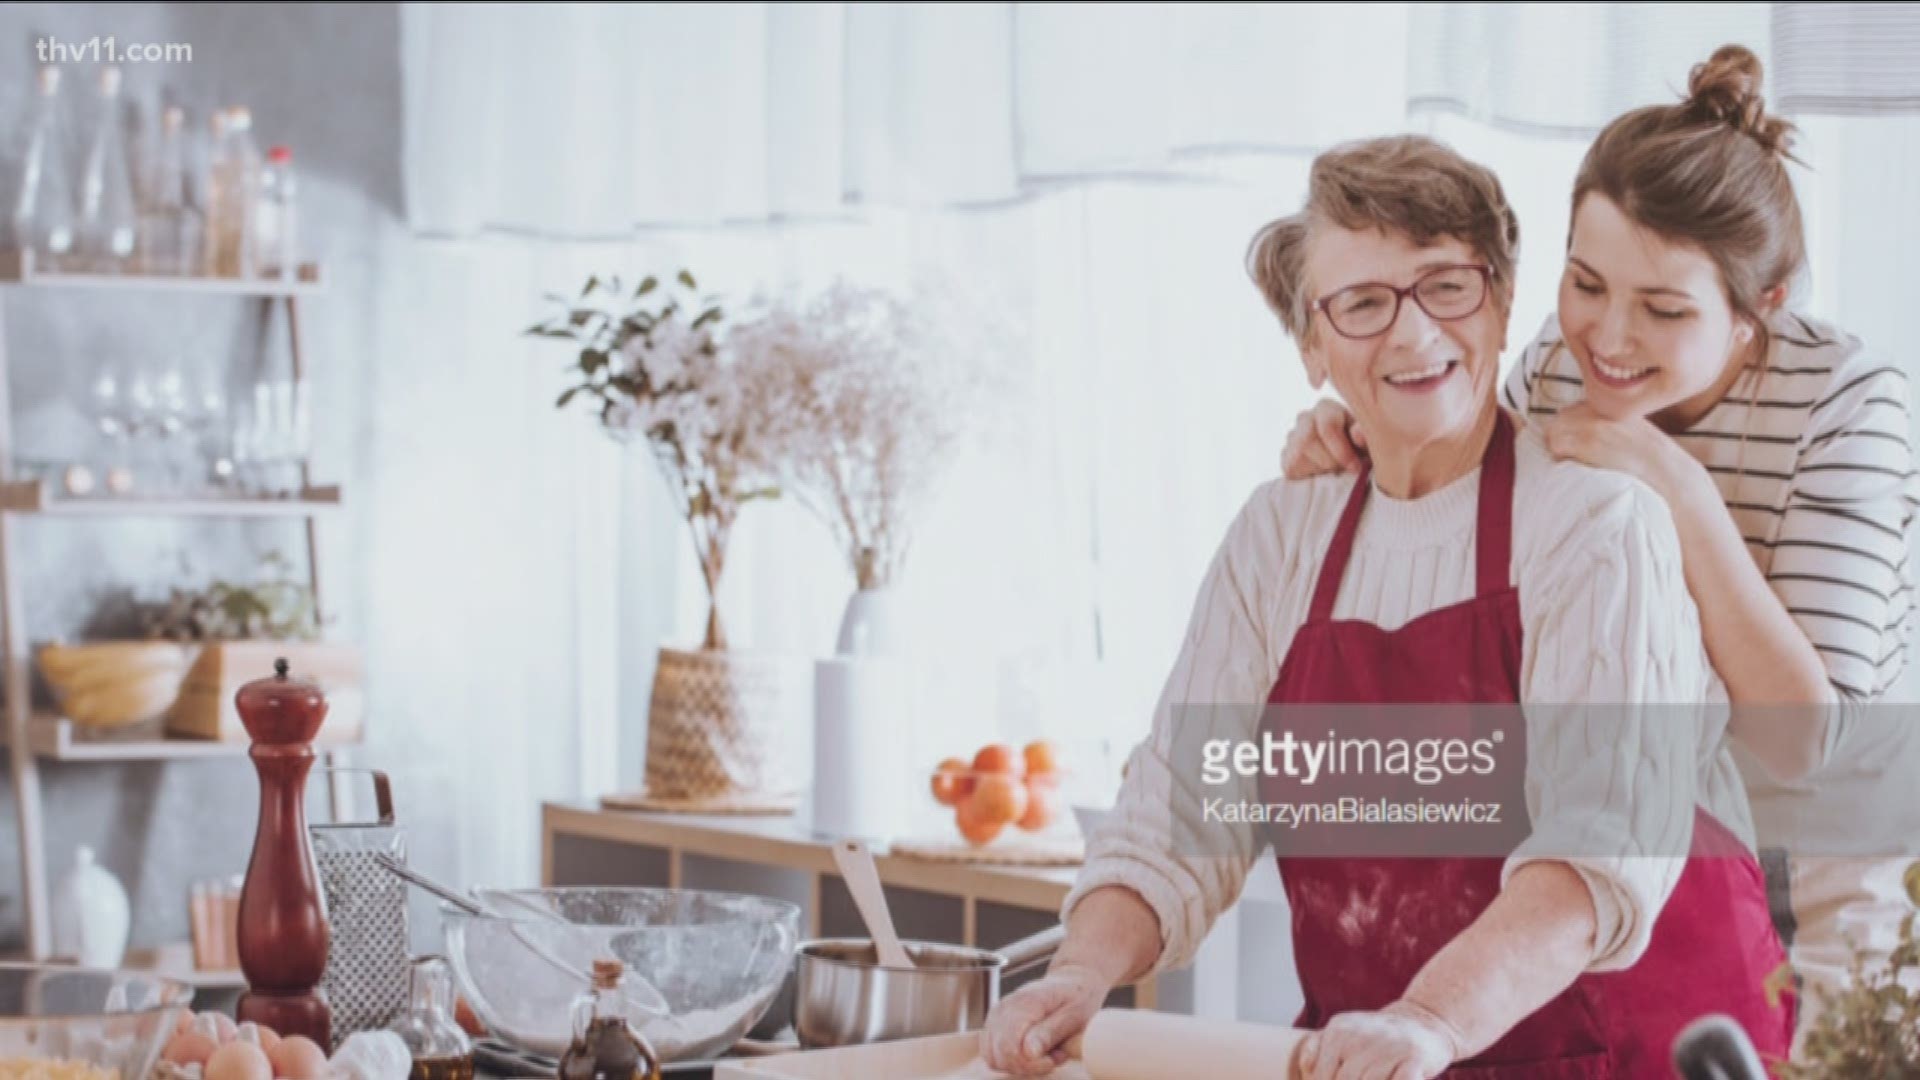 GE APPLIANCES IS SEARCHING FOR THE "GREAT AMERICAN GRANDMA." THE COMPANY PLANS TO PAY 50 THOUSAND DOLLARS TO THE CHOSEN GRANDMA  FOR ONE YEAR IN EXCHANGE FOR THE GRANDMA SHOWCASING HOW SIMPLE THEIR NEW TECHNOLOGY IS.